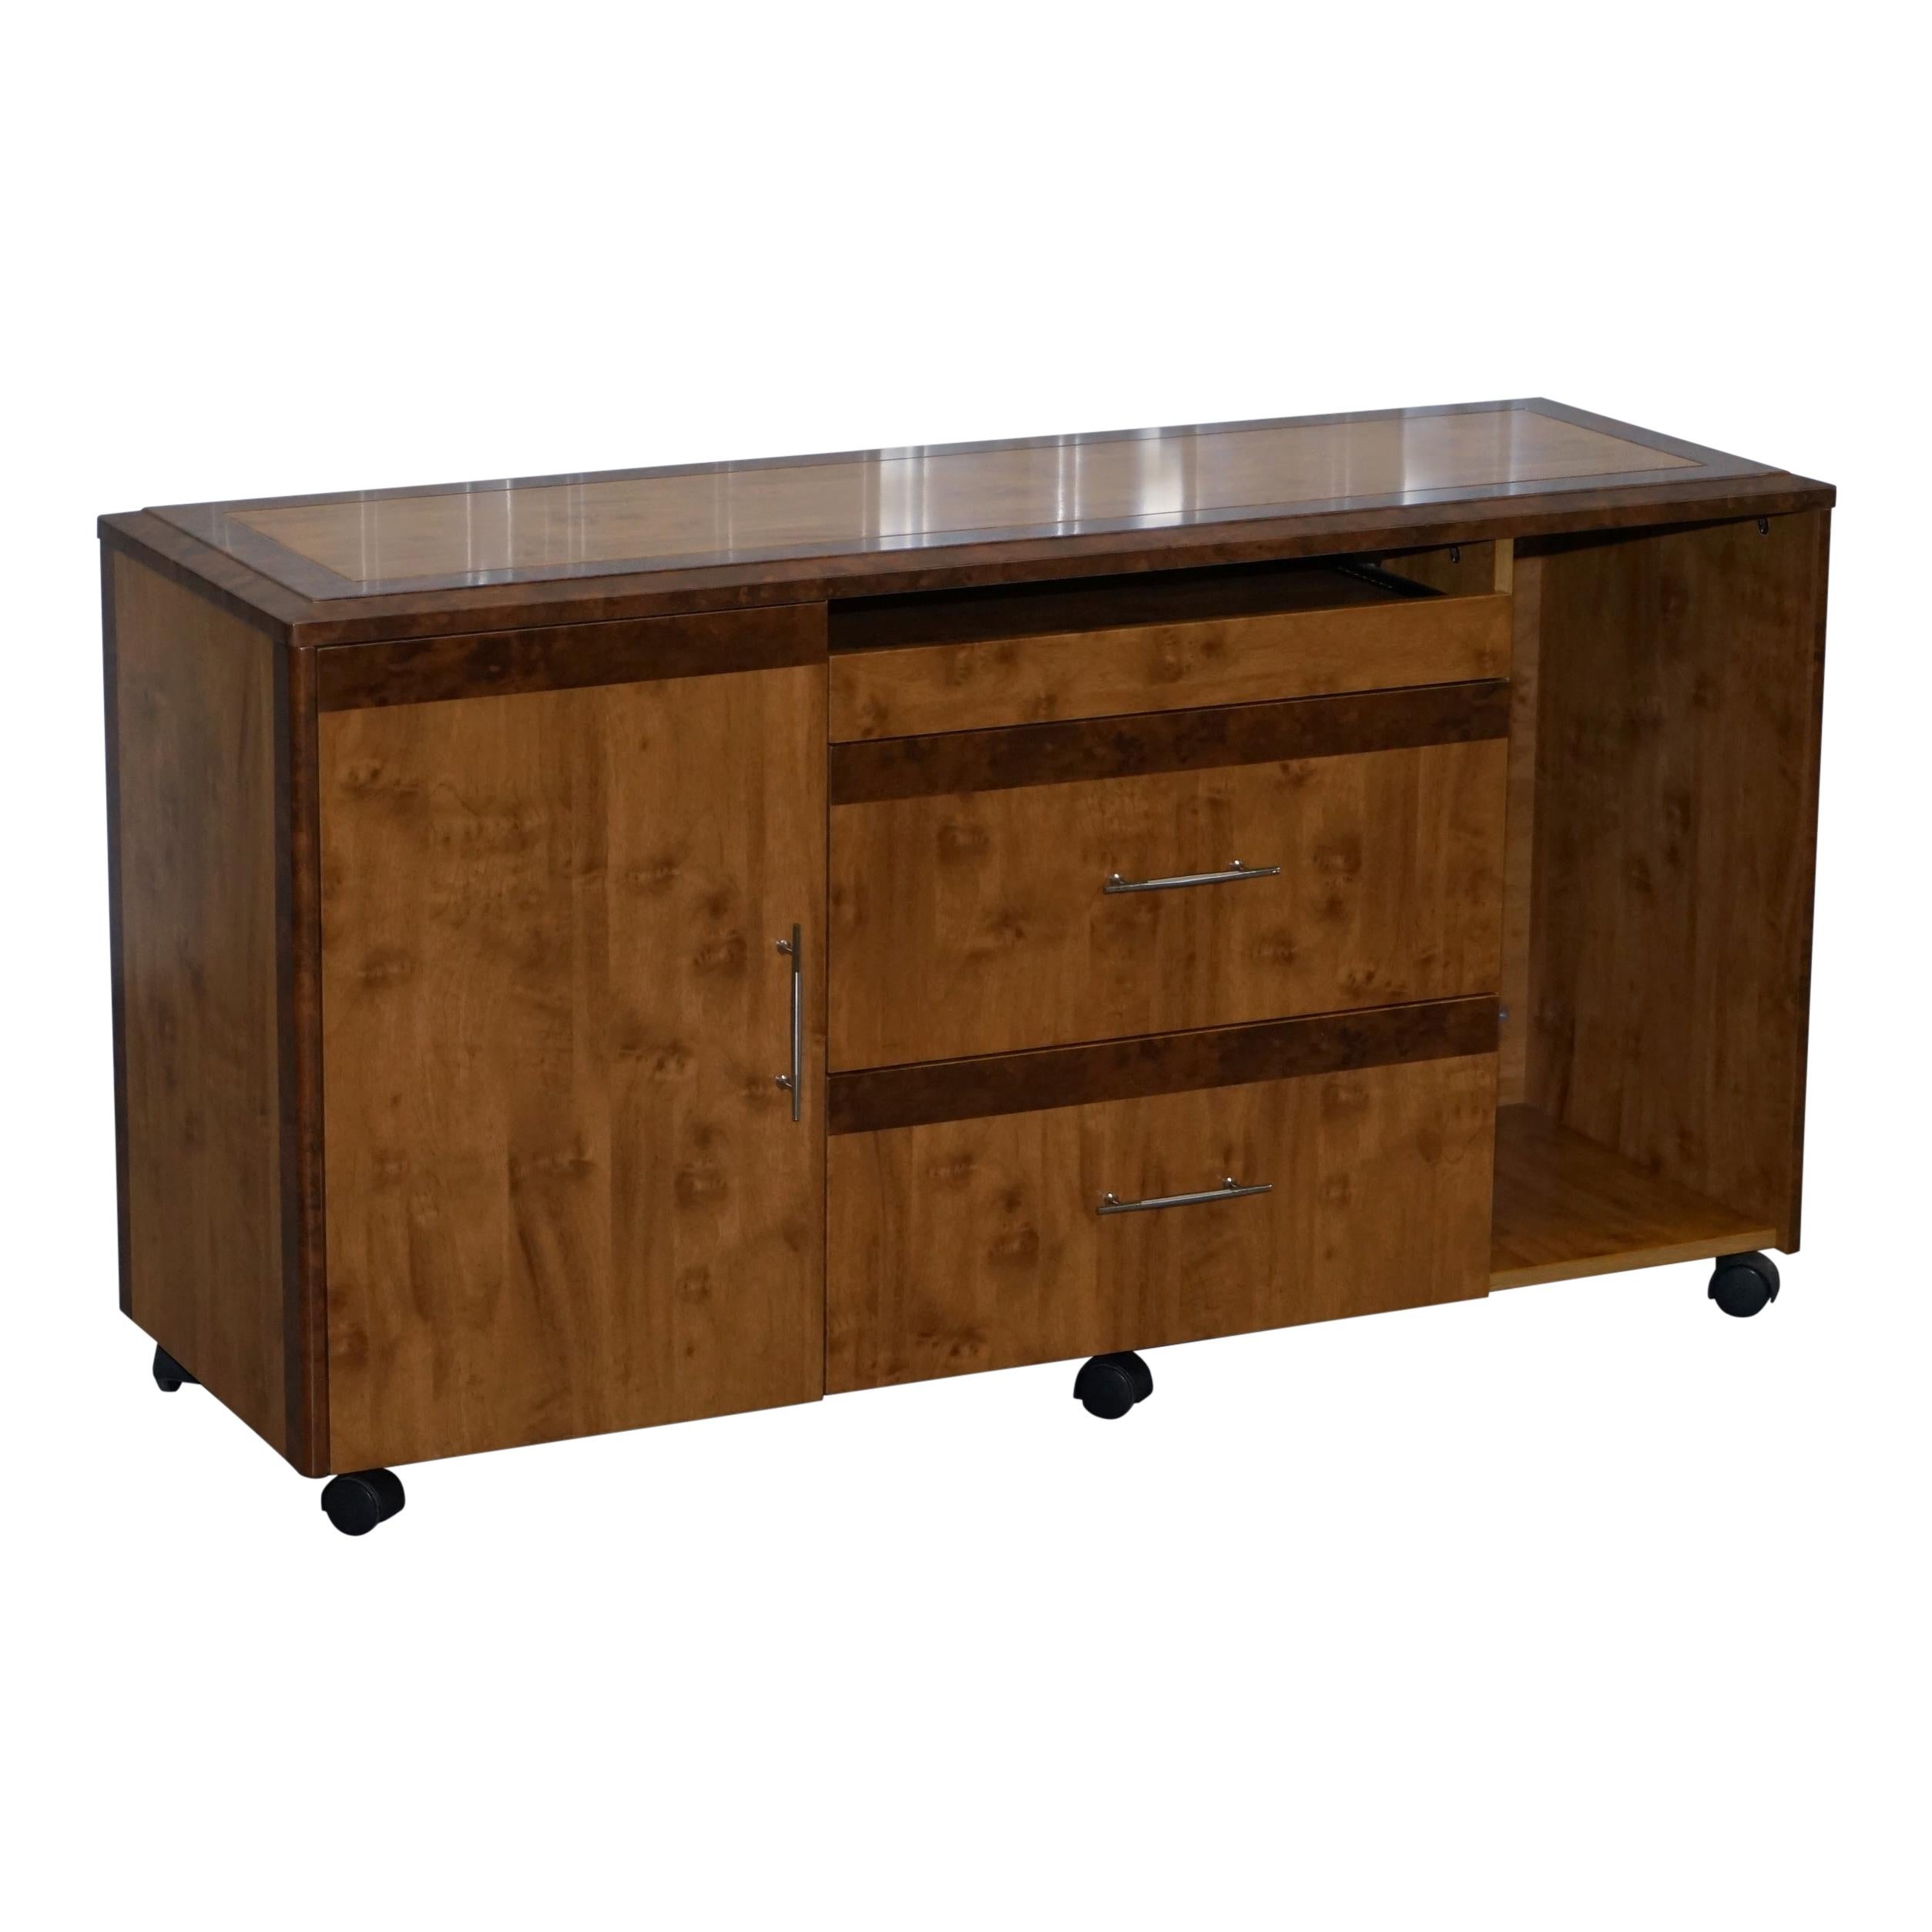 Burr Walnut Sideboard TV Stand Drawers Designed to House Computer Part of Suite